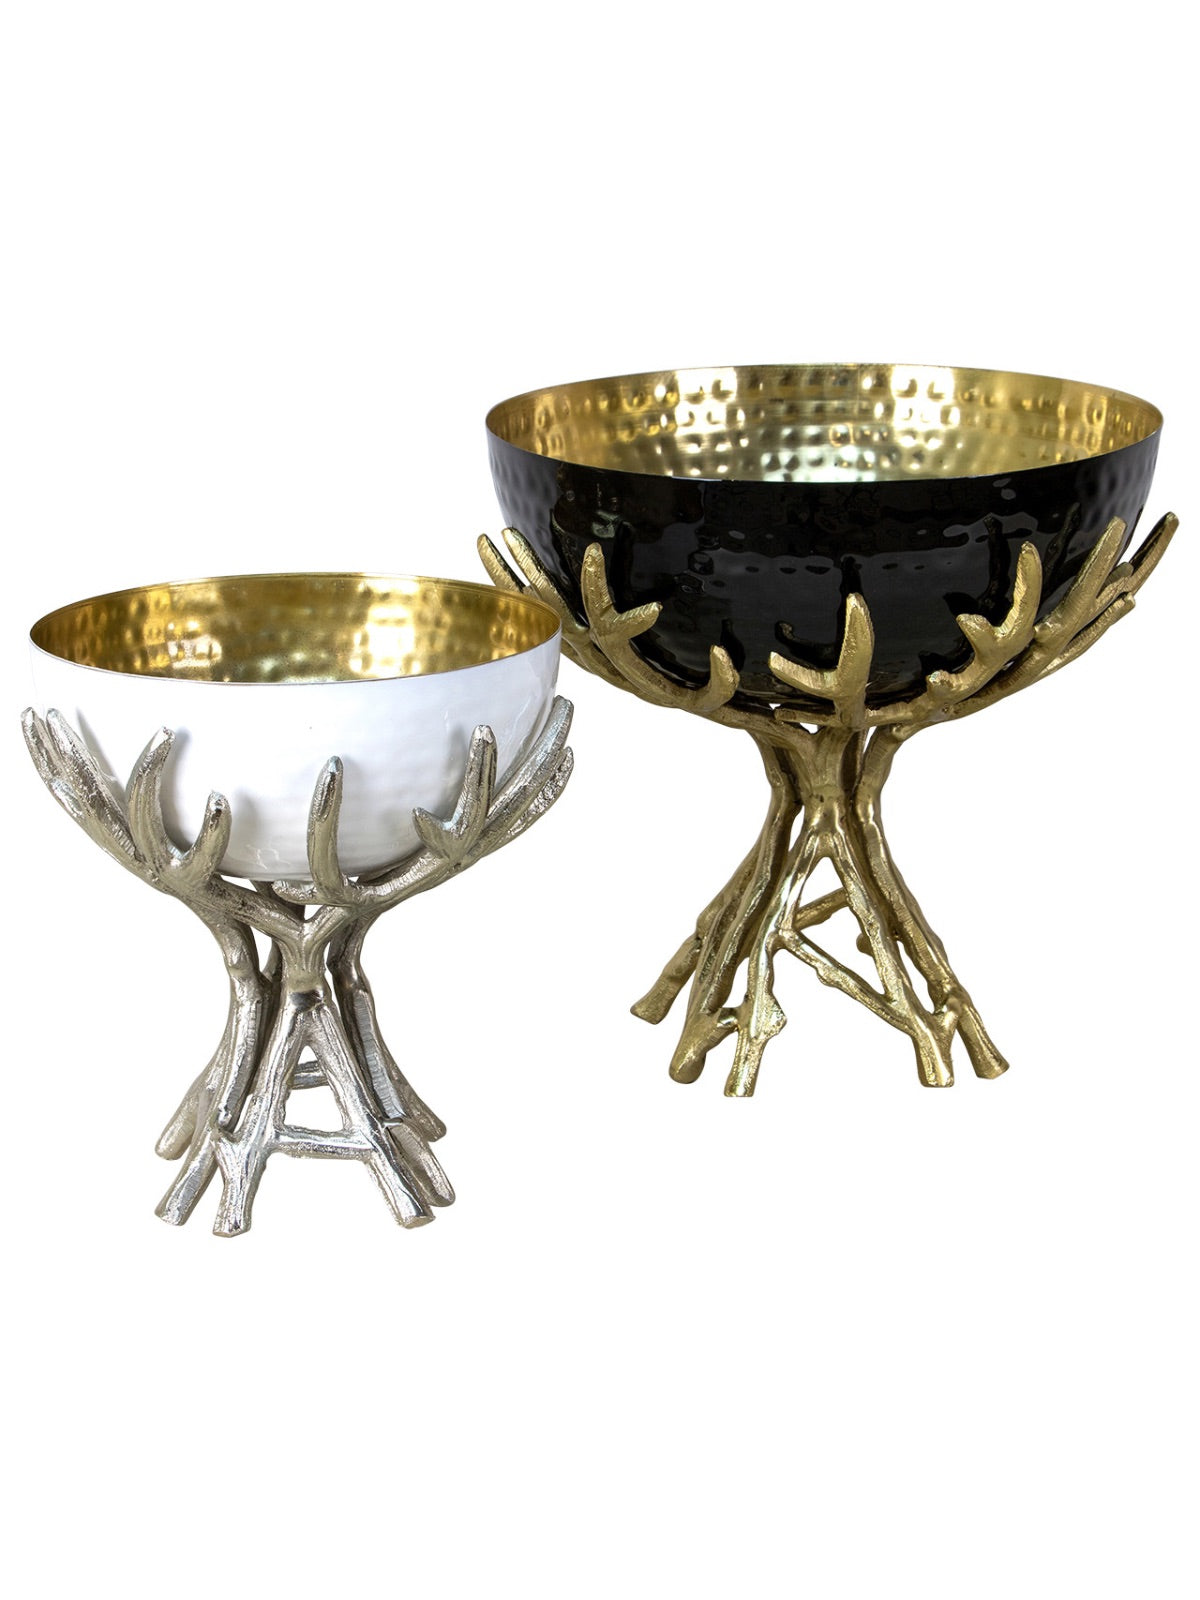 Decorative bowl with gold interior sitting on a stunning stainless steel branch stand Available in 2 colors.